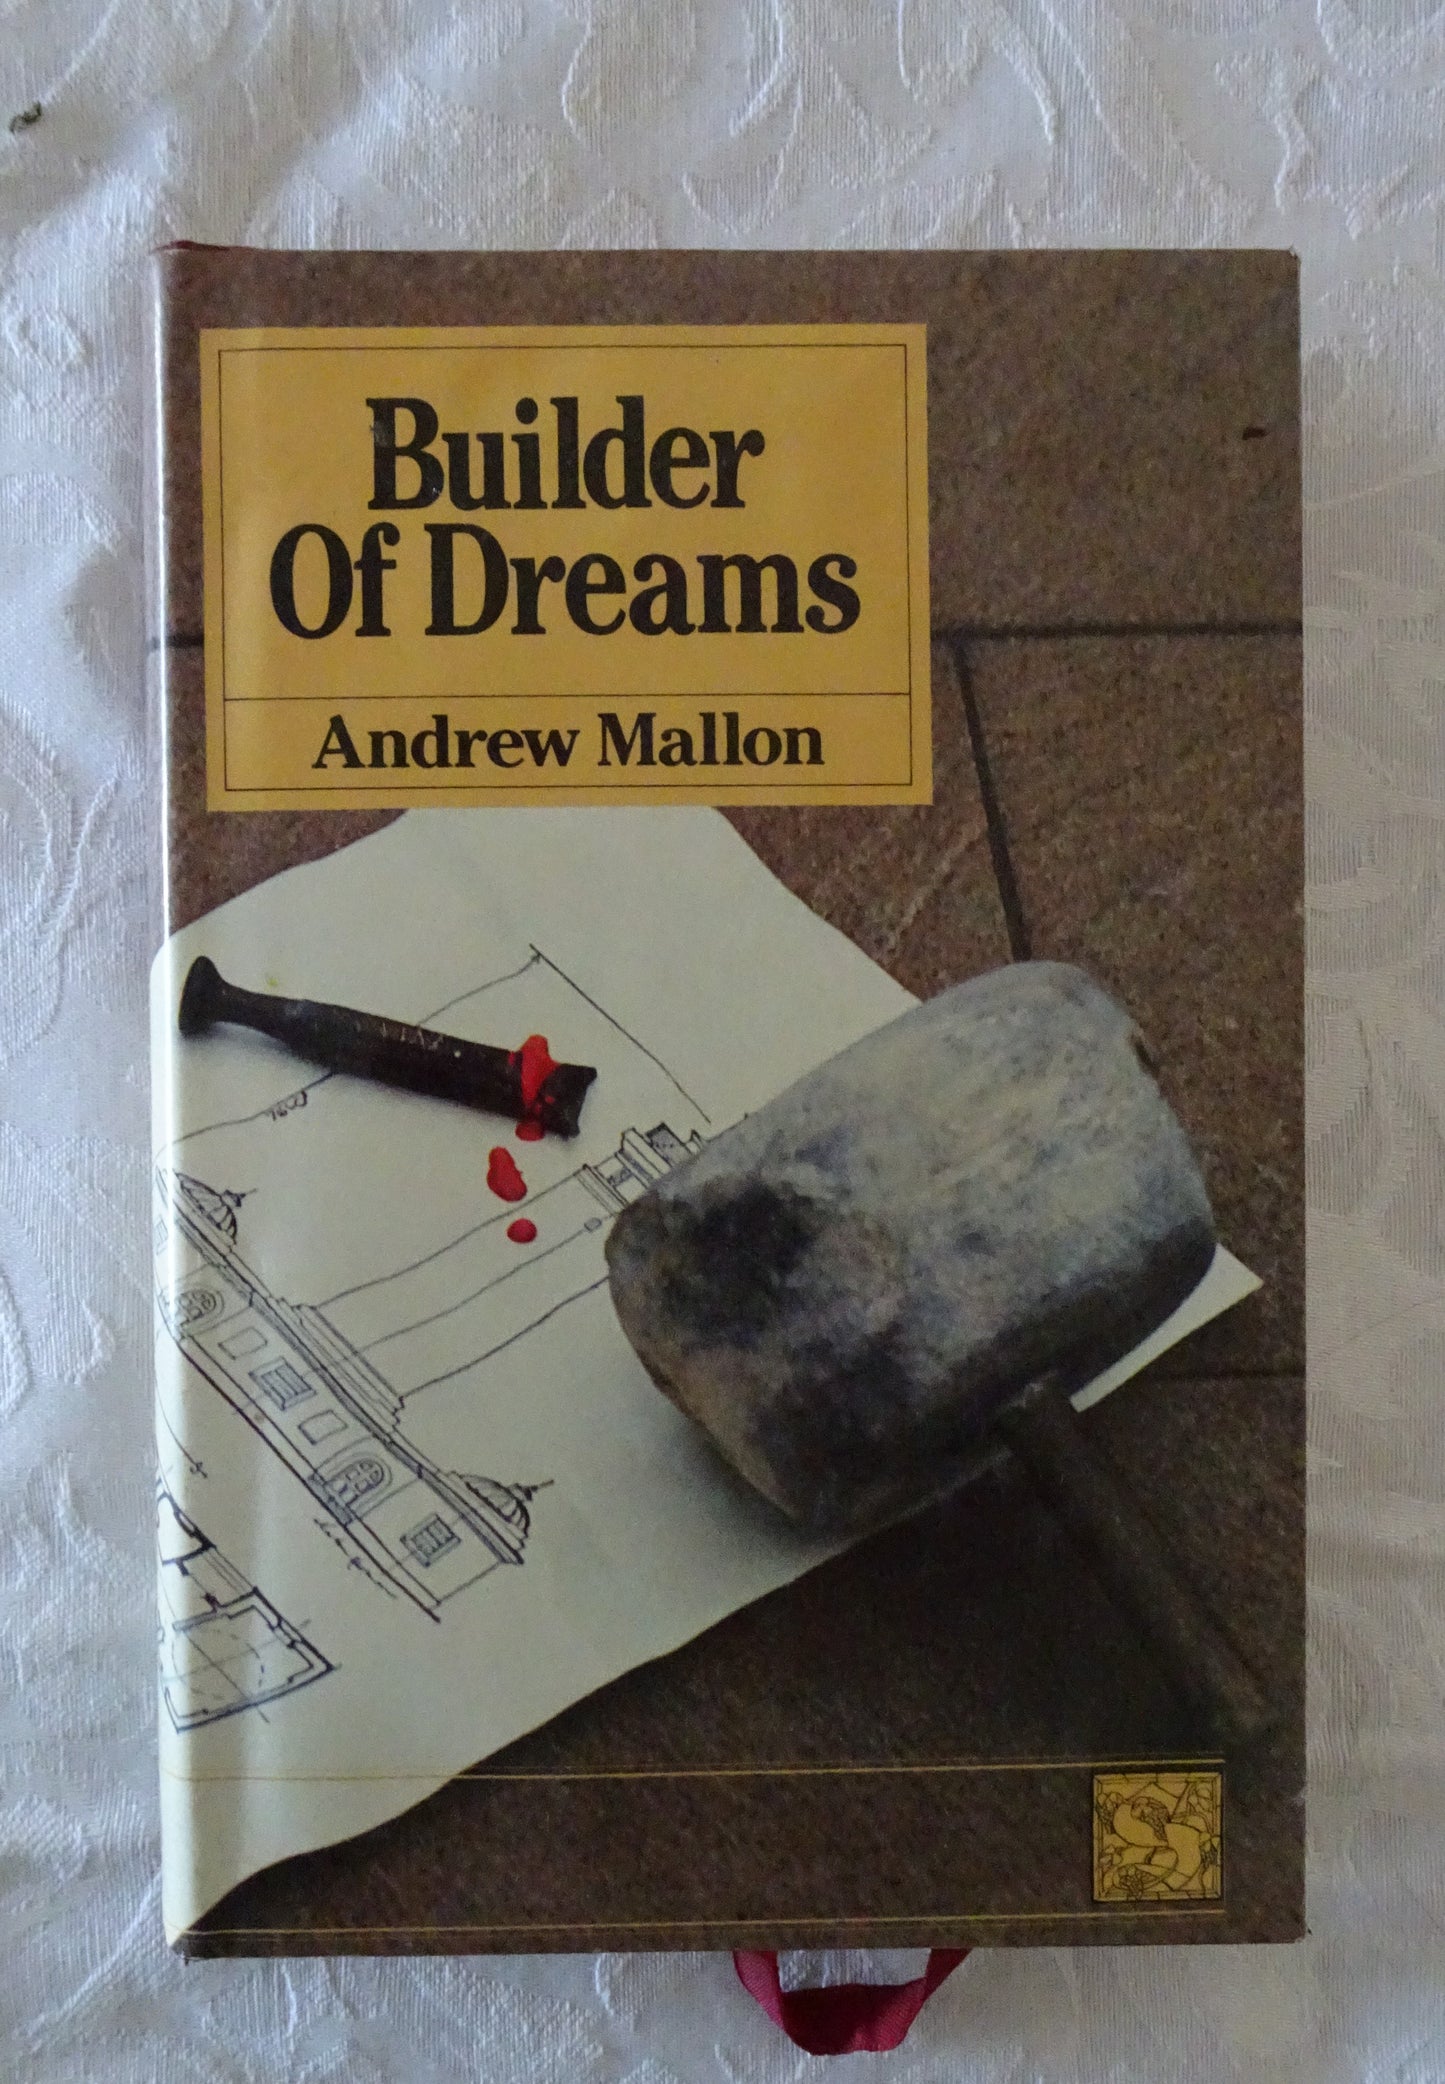 Builder of Dreams by Andrew Mallon